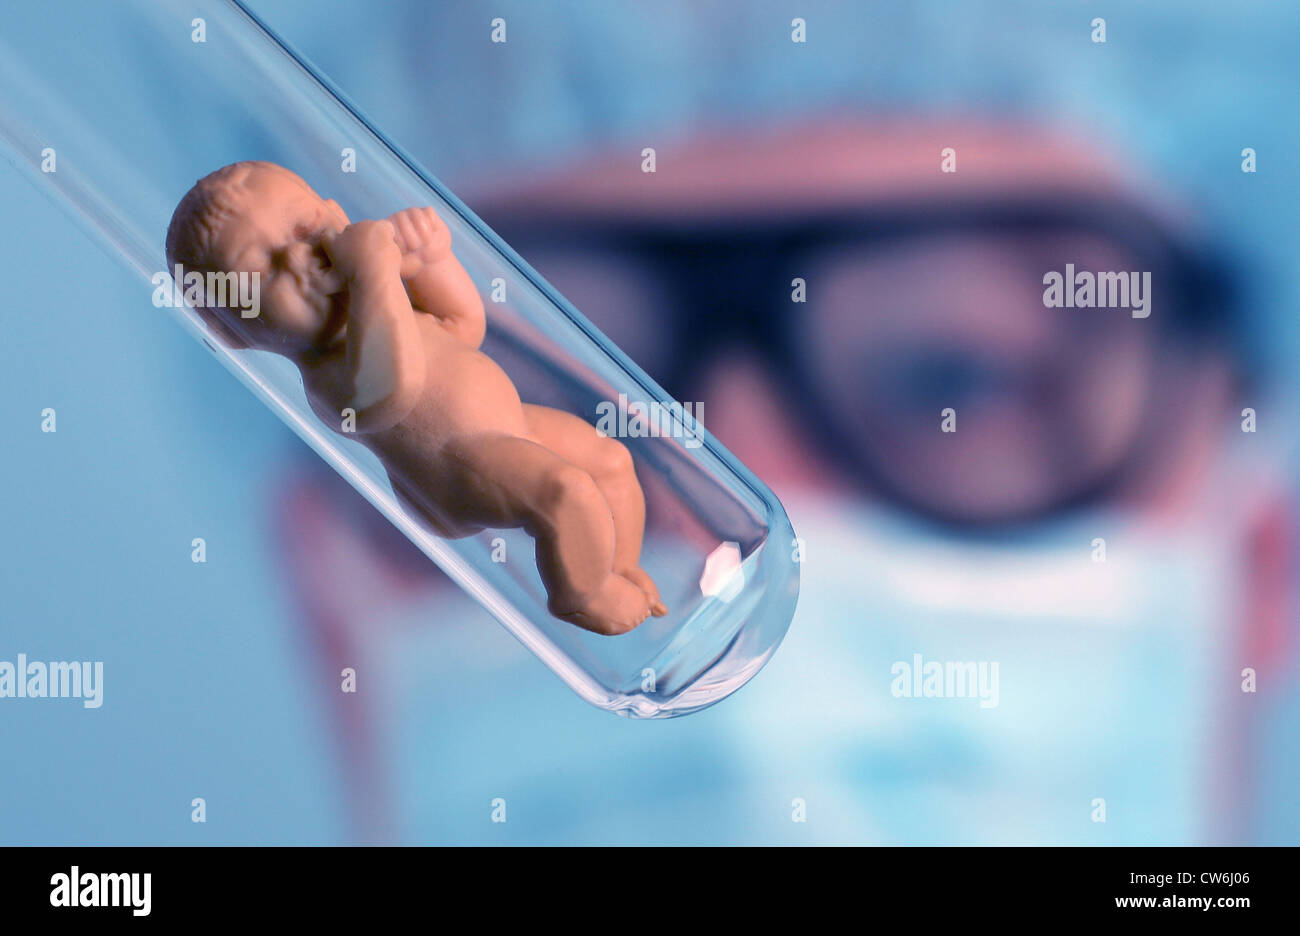 symbol picture test-tube baby Stock Photo